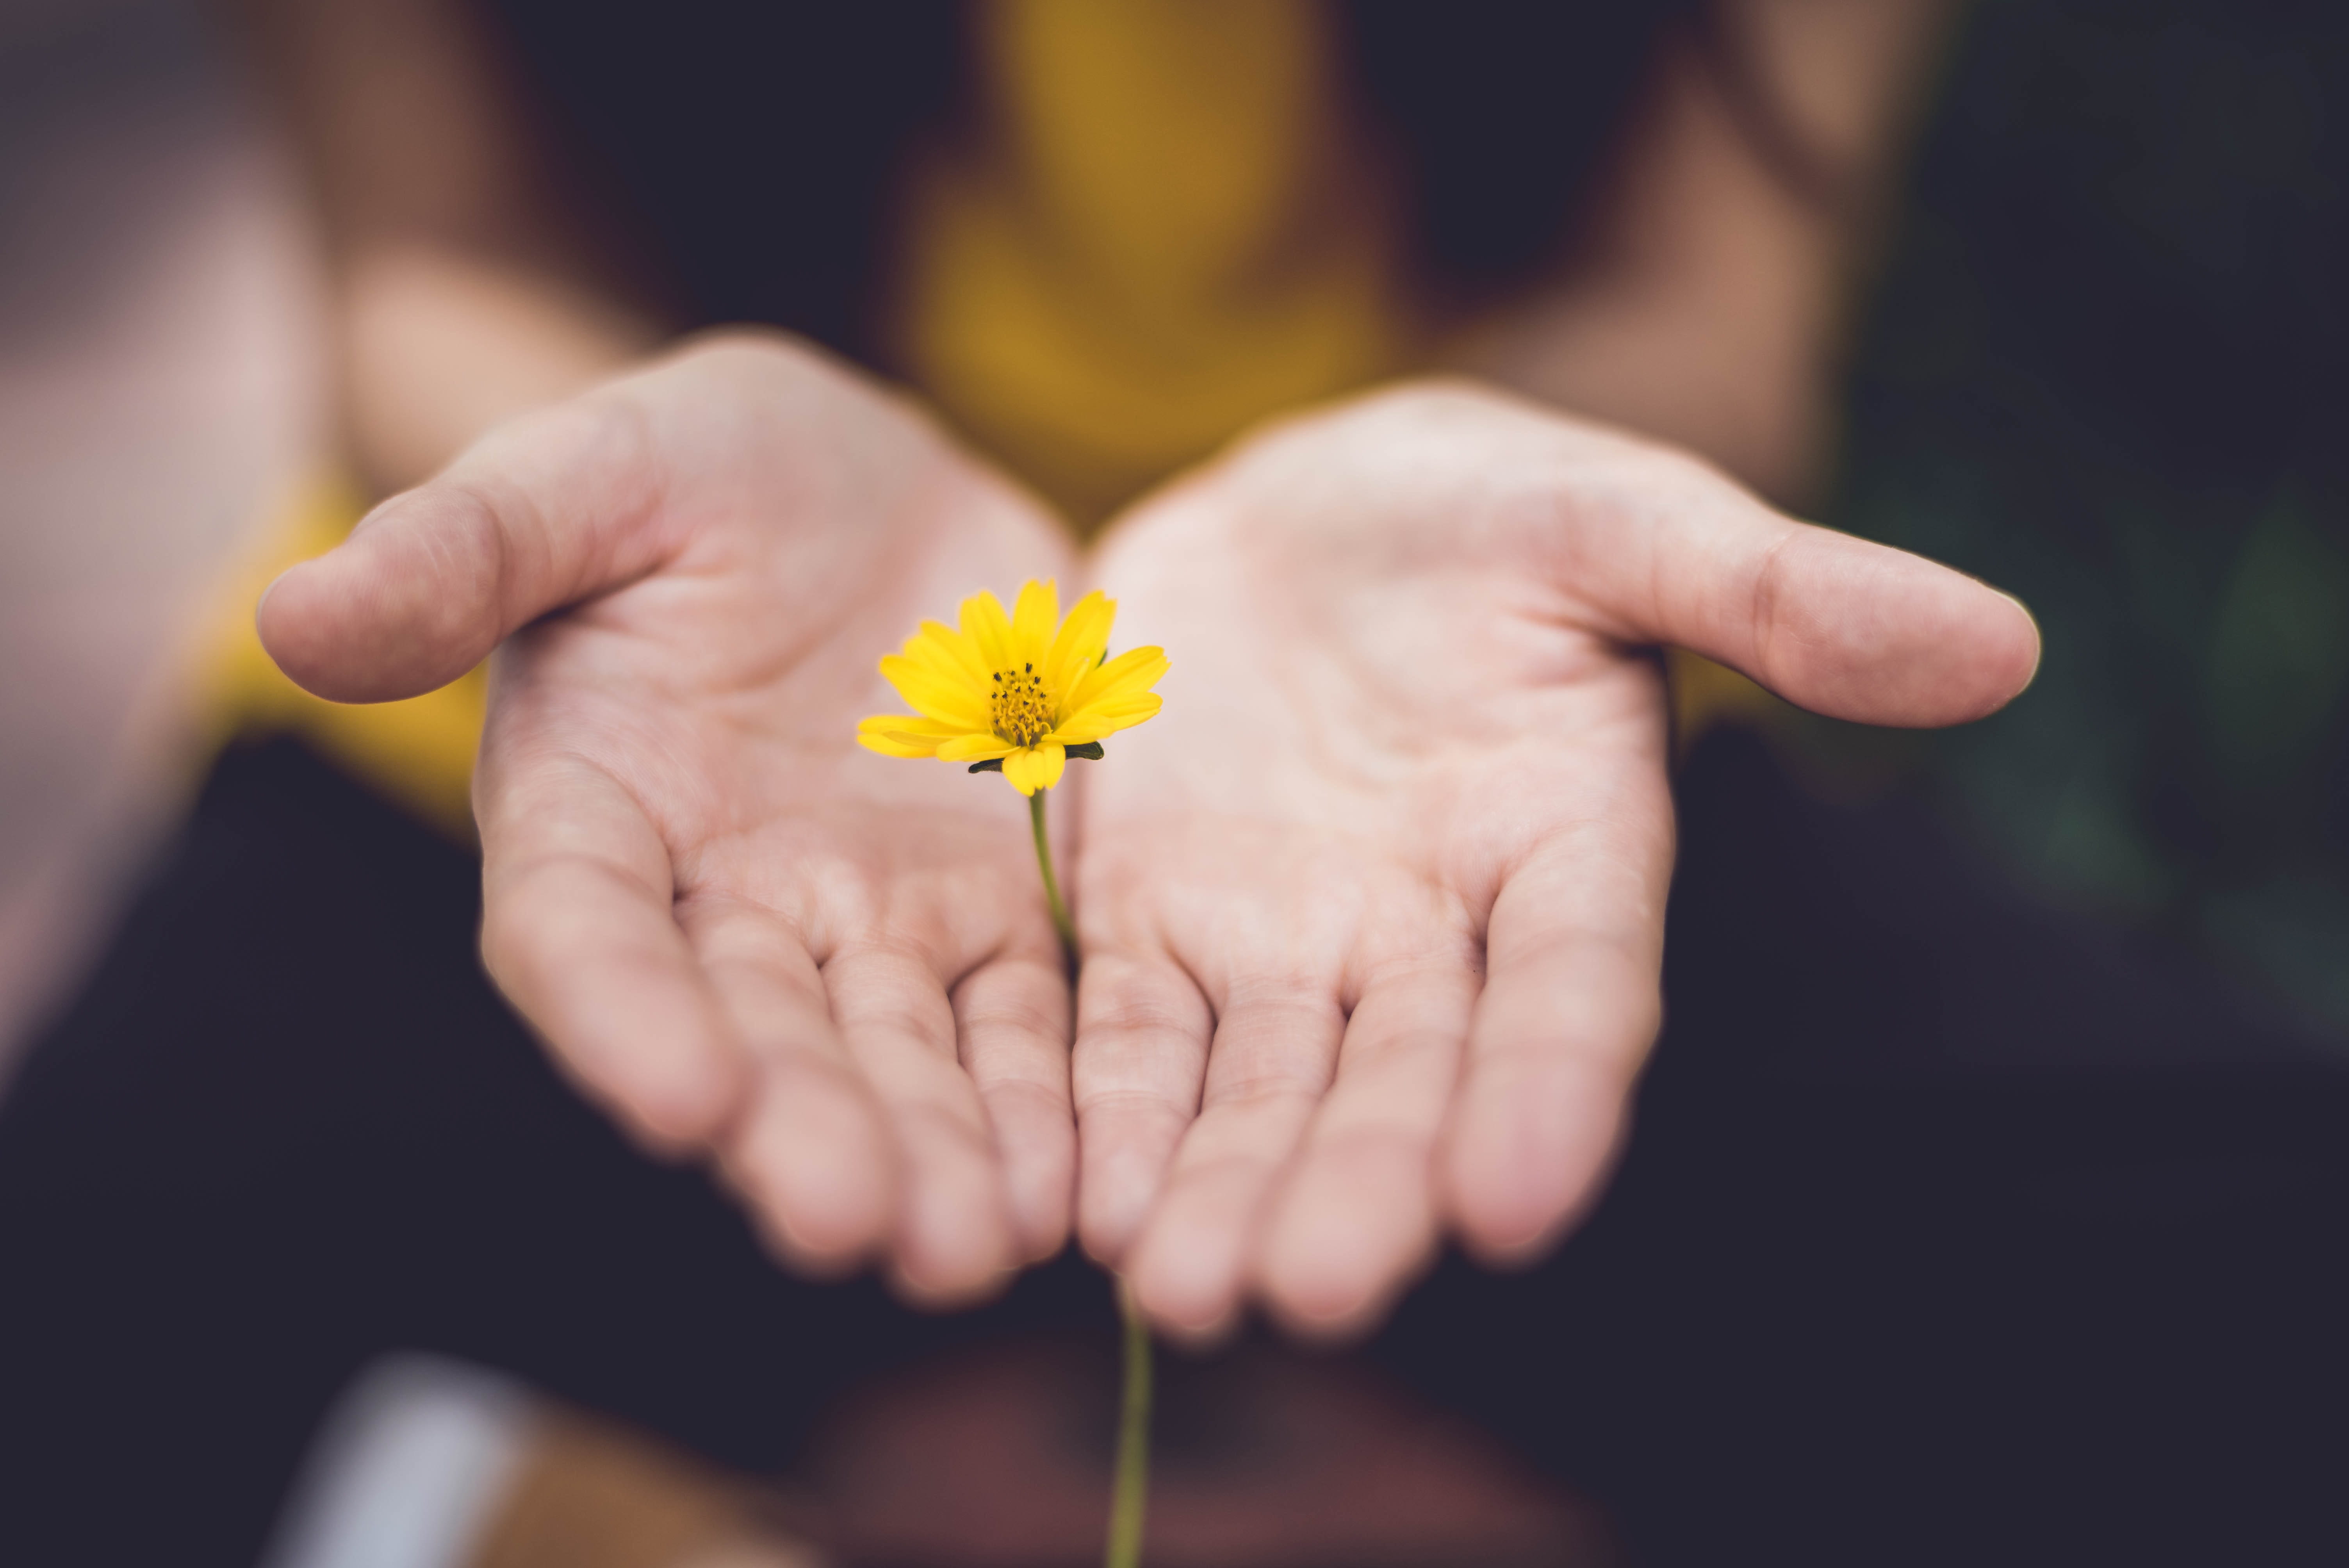 Two hands holding a yellow flower.